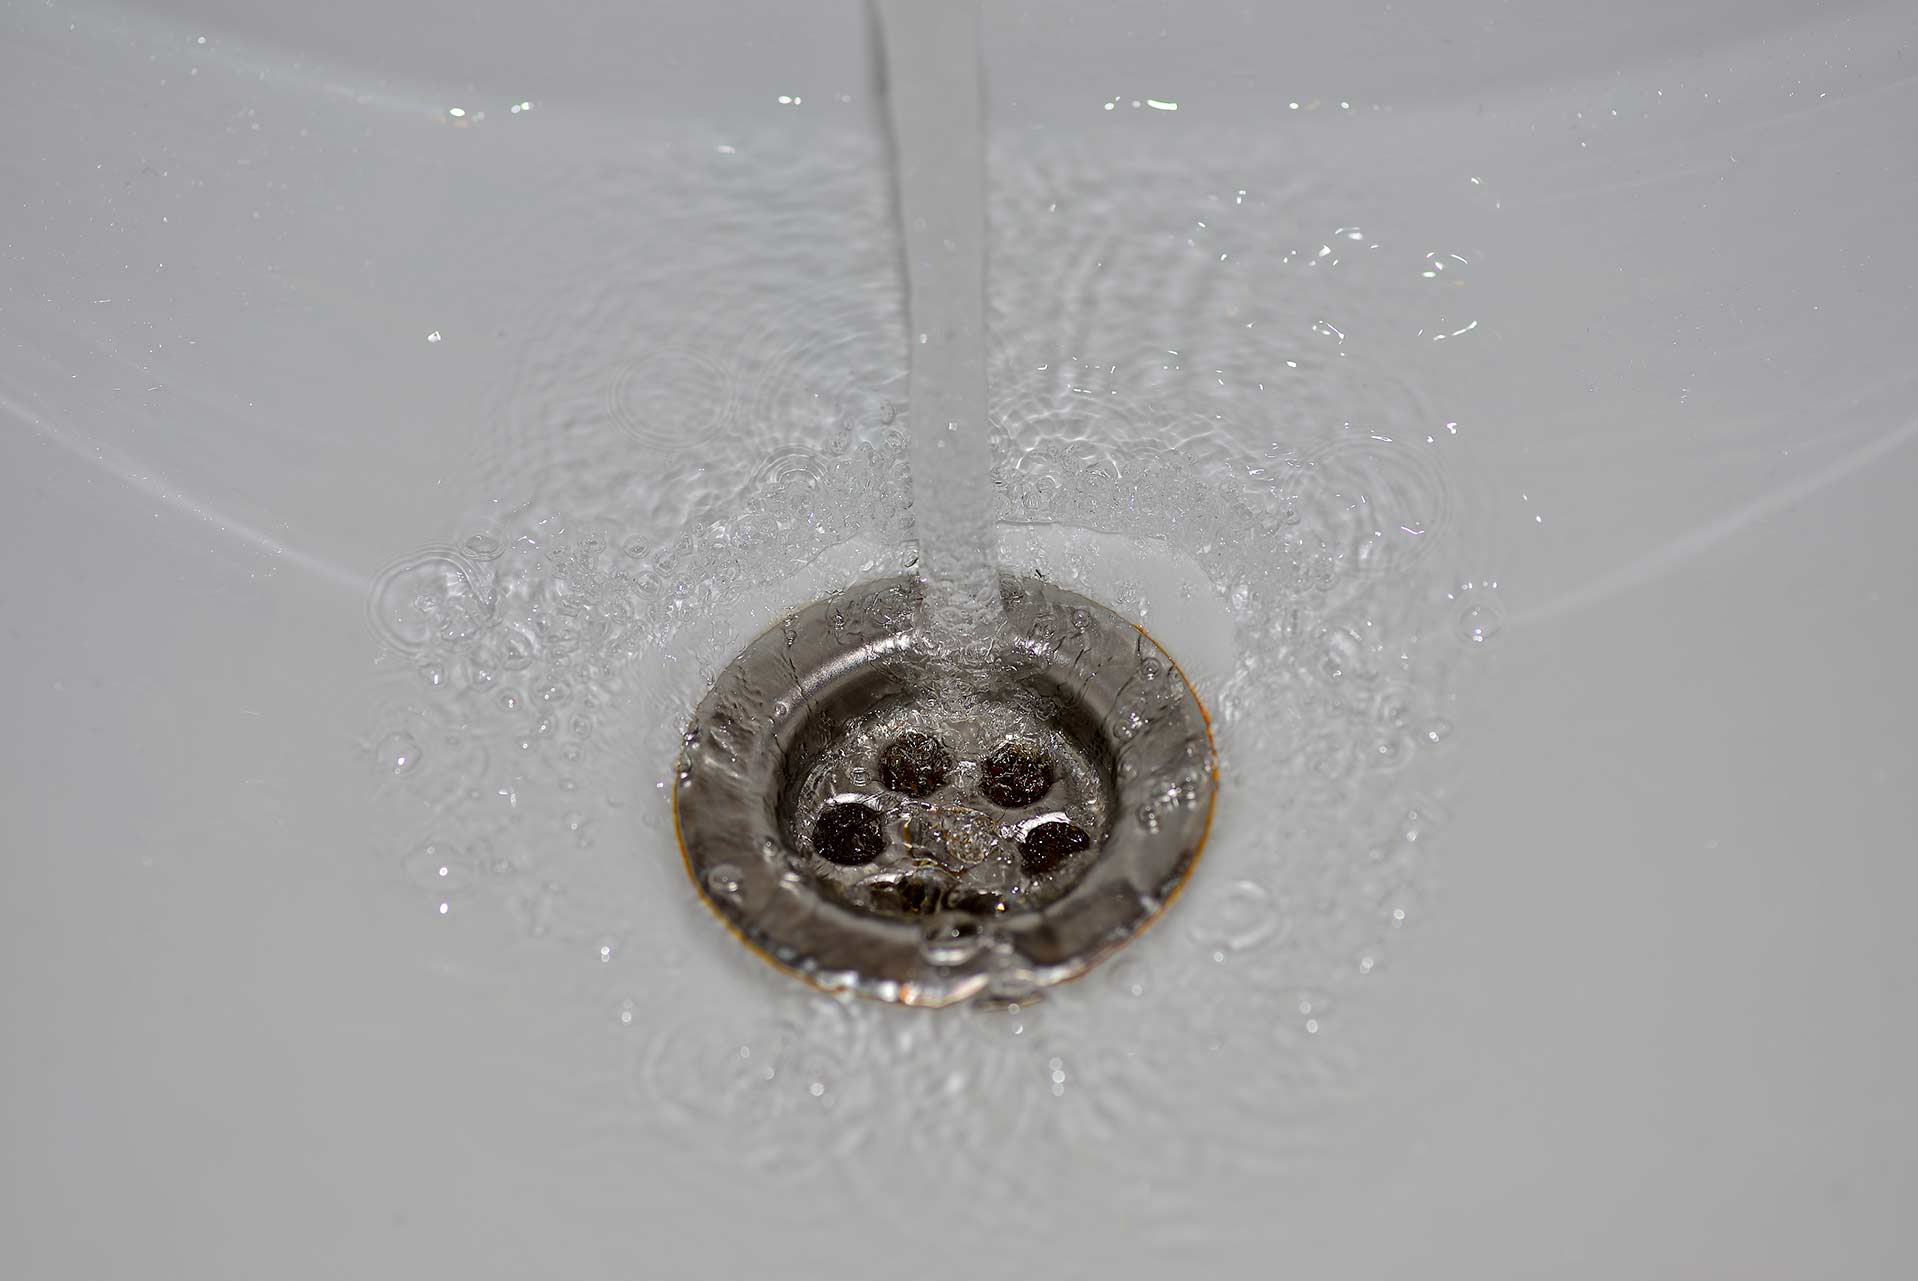 A2B Drains provides services to unblock blocked sinks and drains for properties in Broadgate.